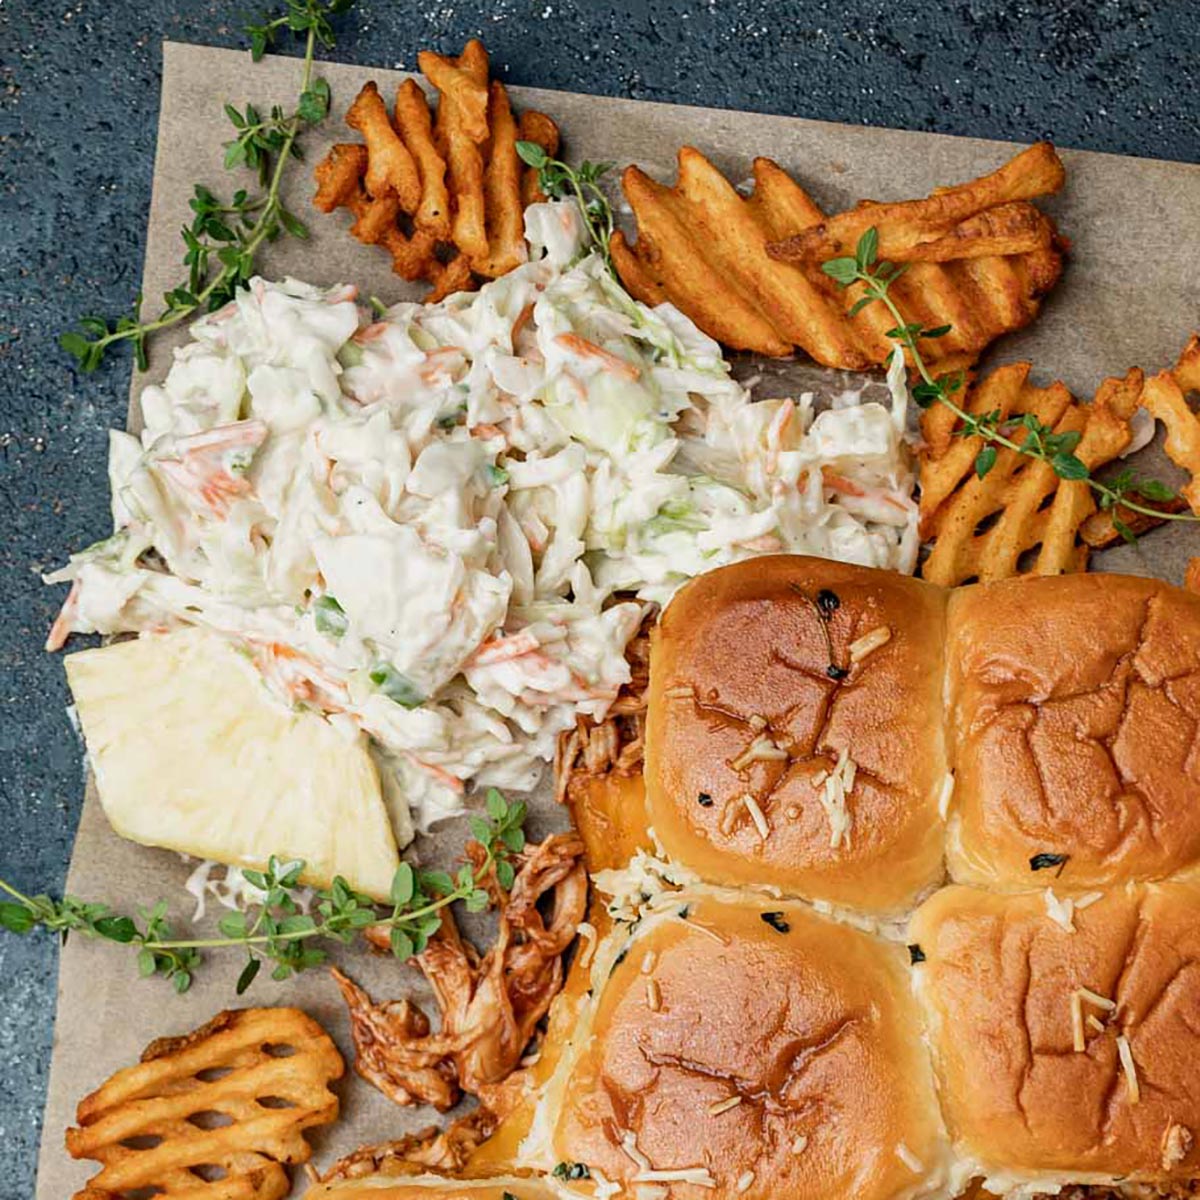 pineapple coleslaw, fries and sliders on parchment paper